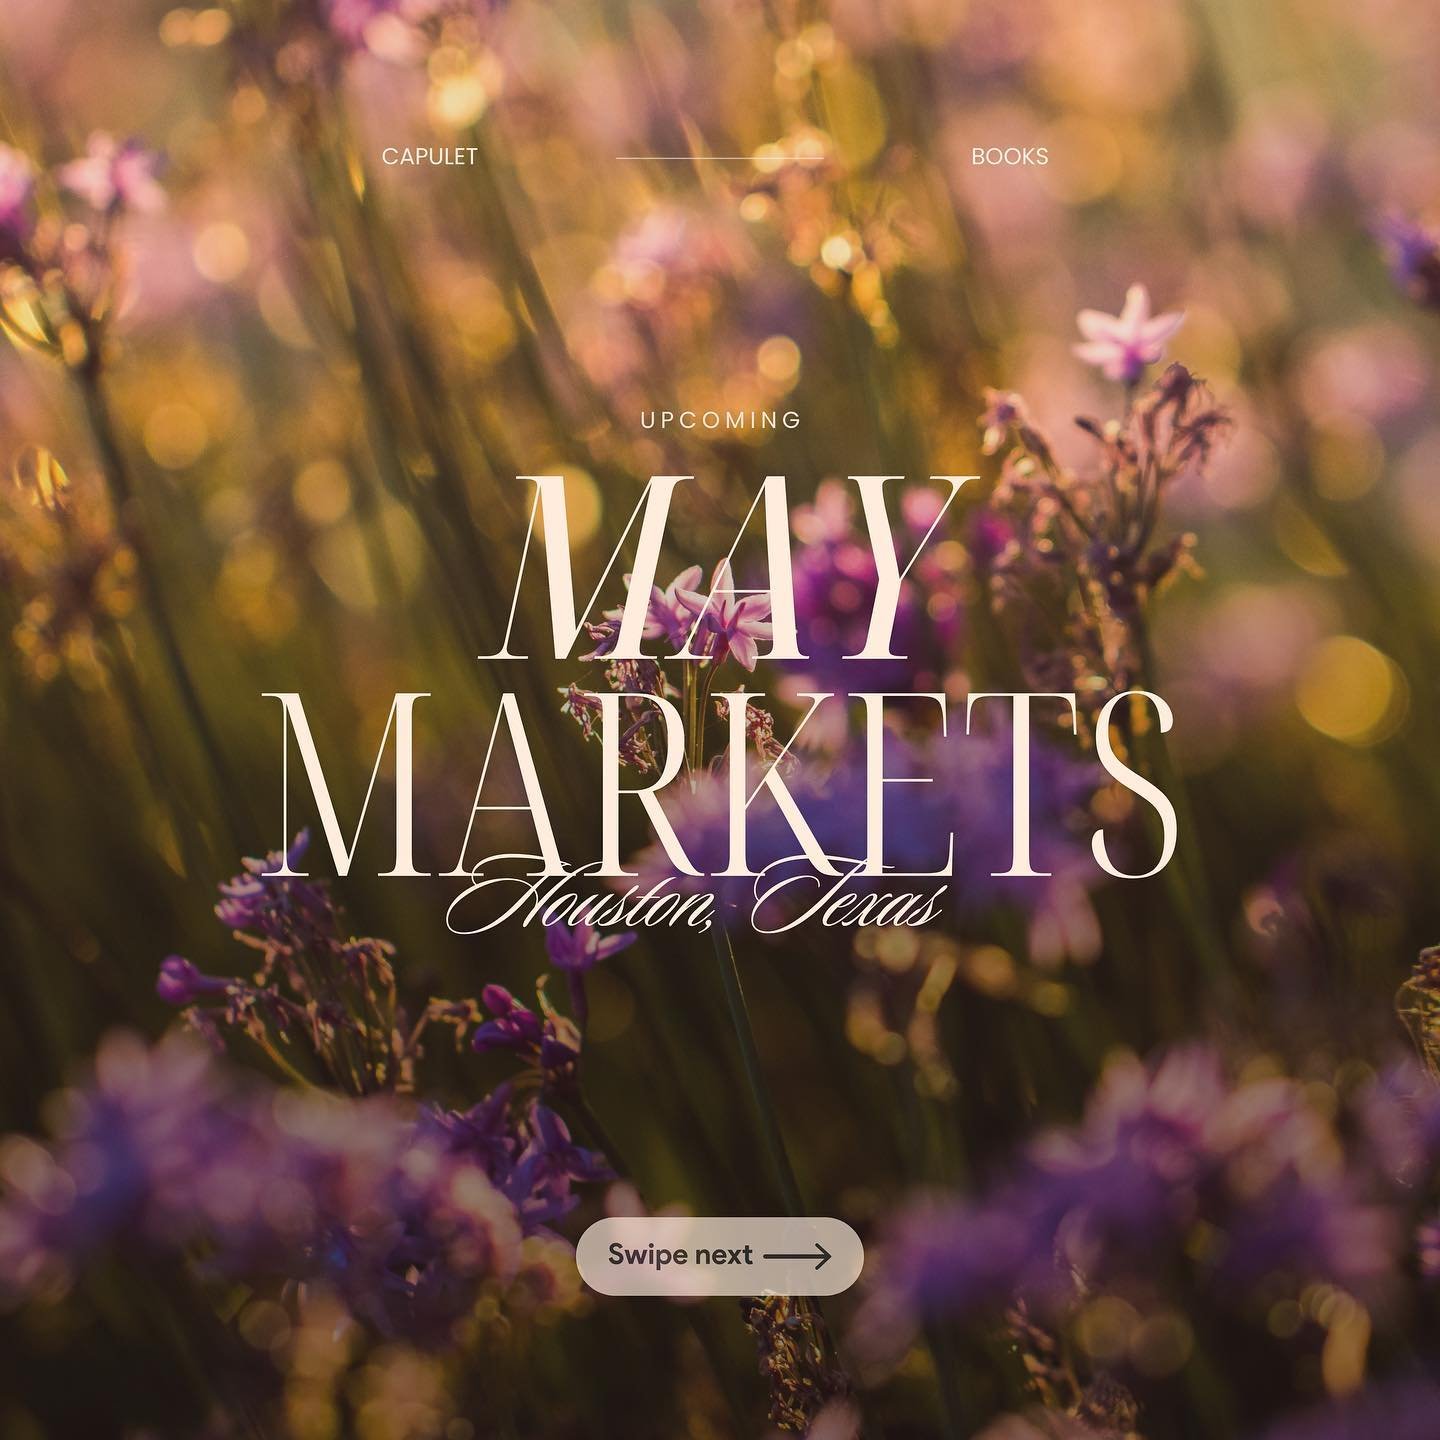 Happy May! We&rsquo;re back with a market this month. We&rsquo;re super excited to be at Who&rsquo;s That Girl at Johnny&rsquo;s Gold Brick on the 13th! It&rsquo;s a Monday, so pop on over after work to grab a drink and say hello! We&rsquo;ll also ha